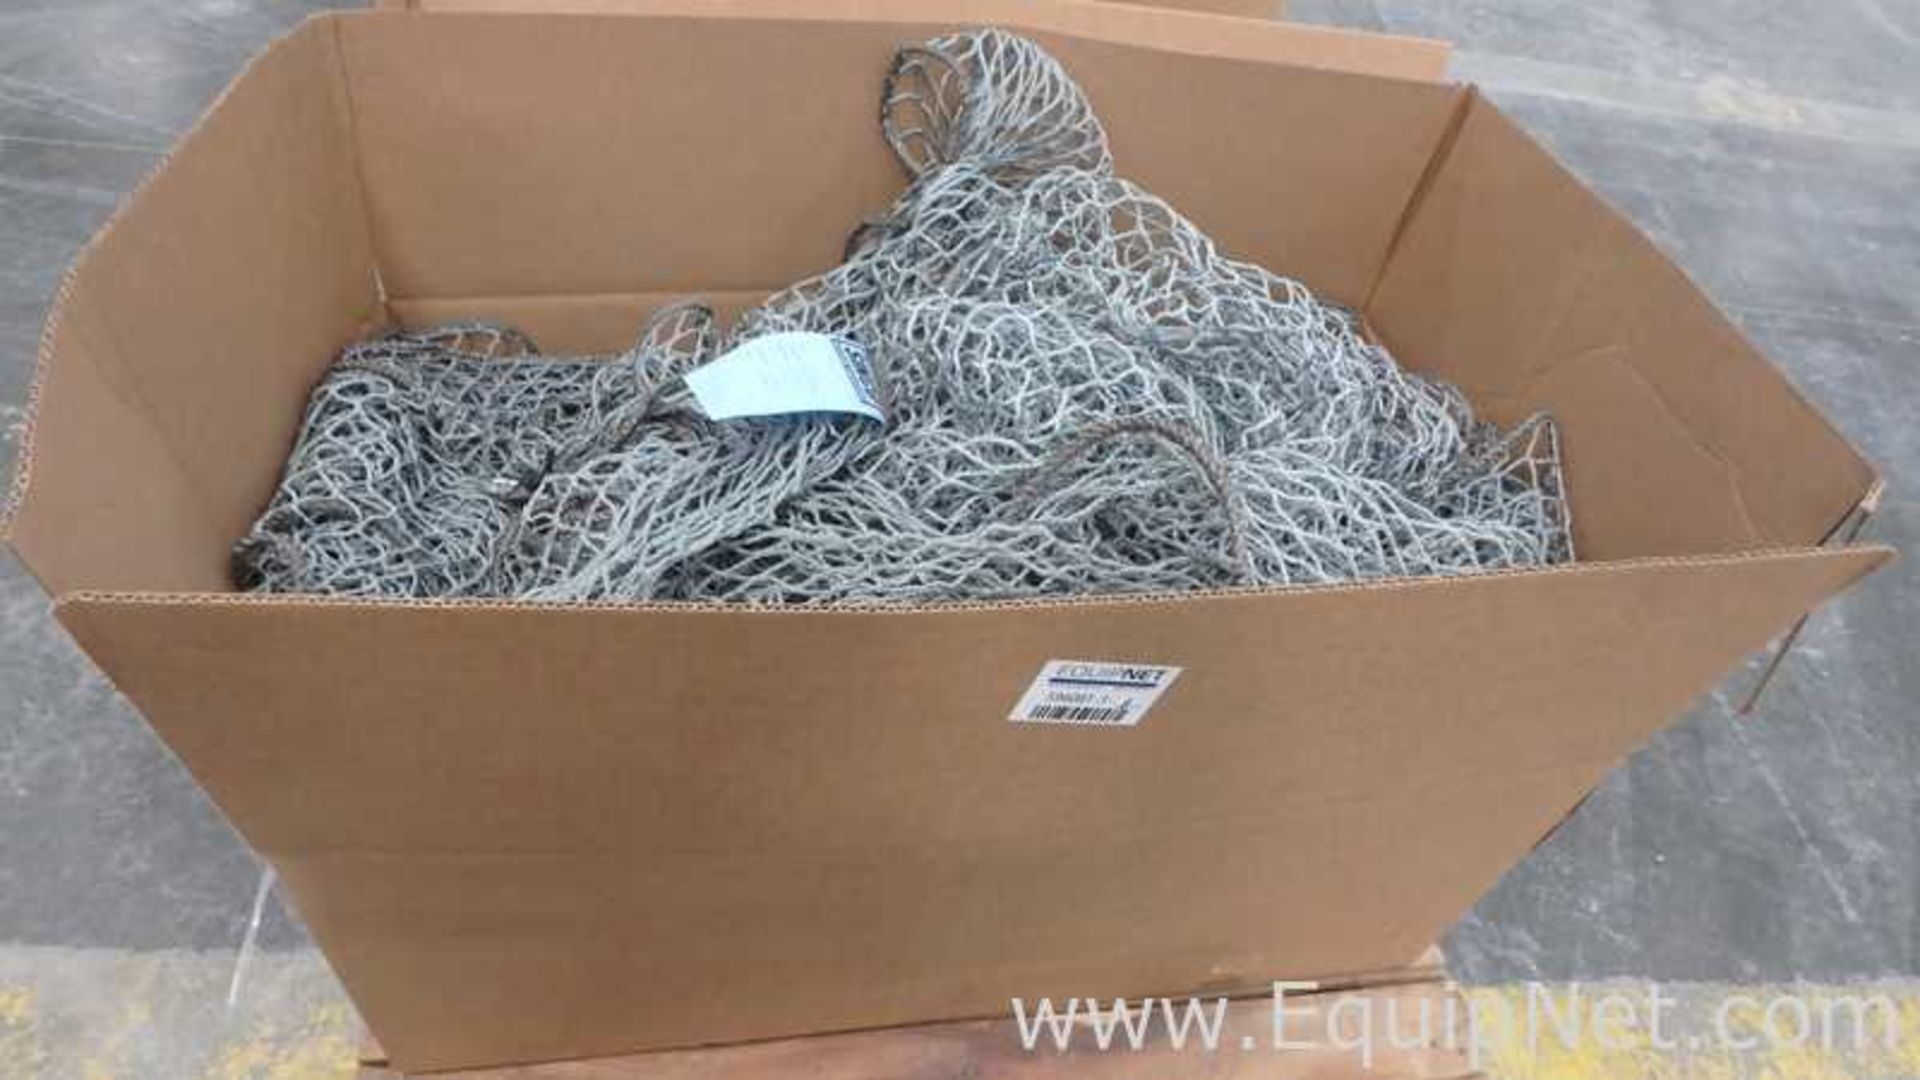 Lot of 1 Net Box Sinco Netting Solutions line/Item LN9/IN 4101908 Description Number 130